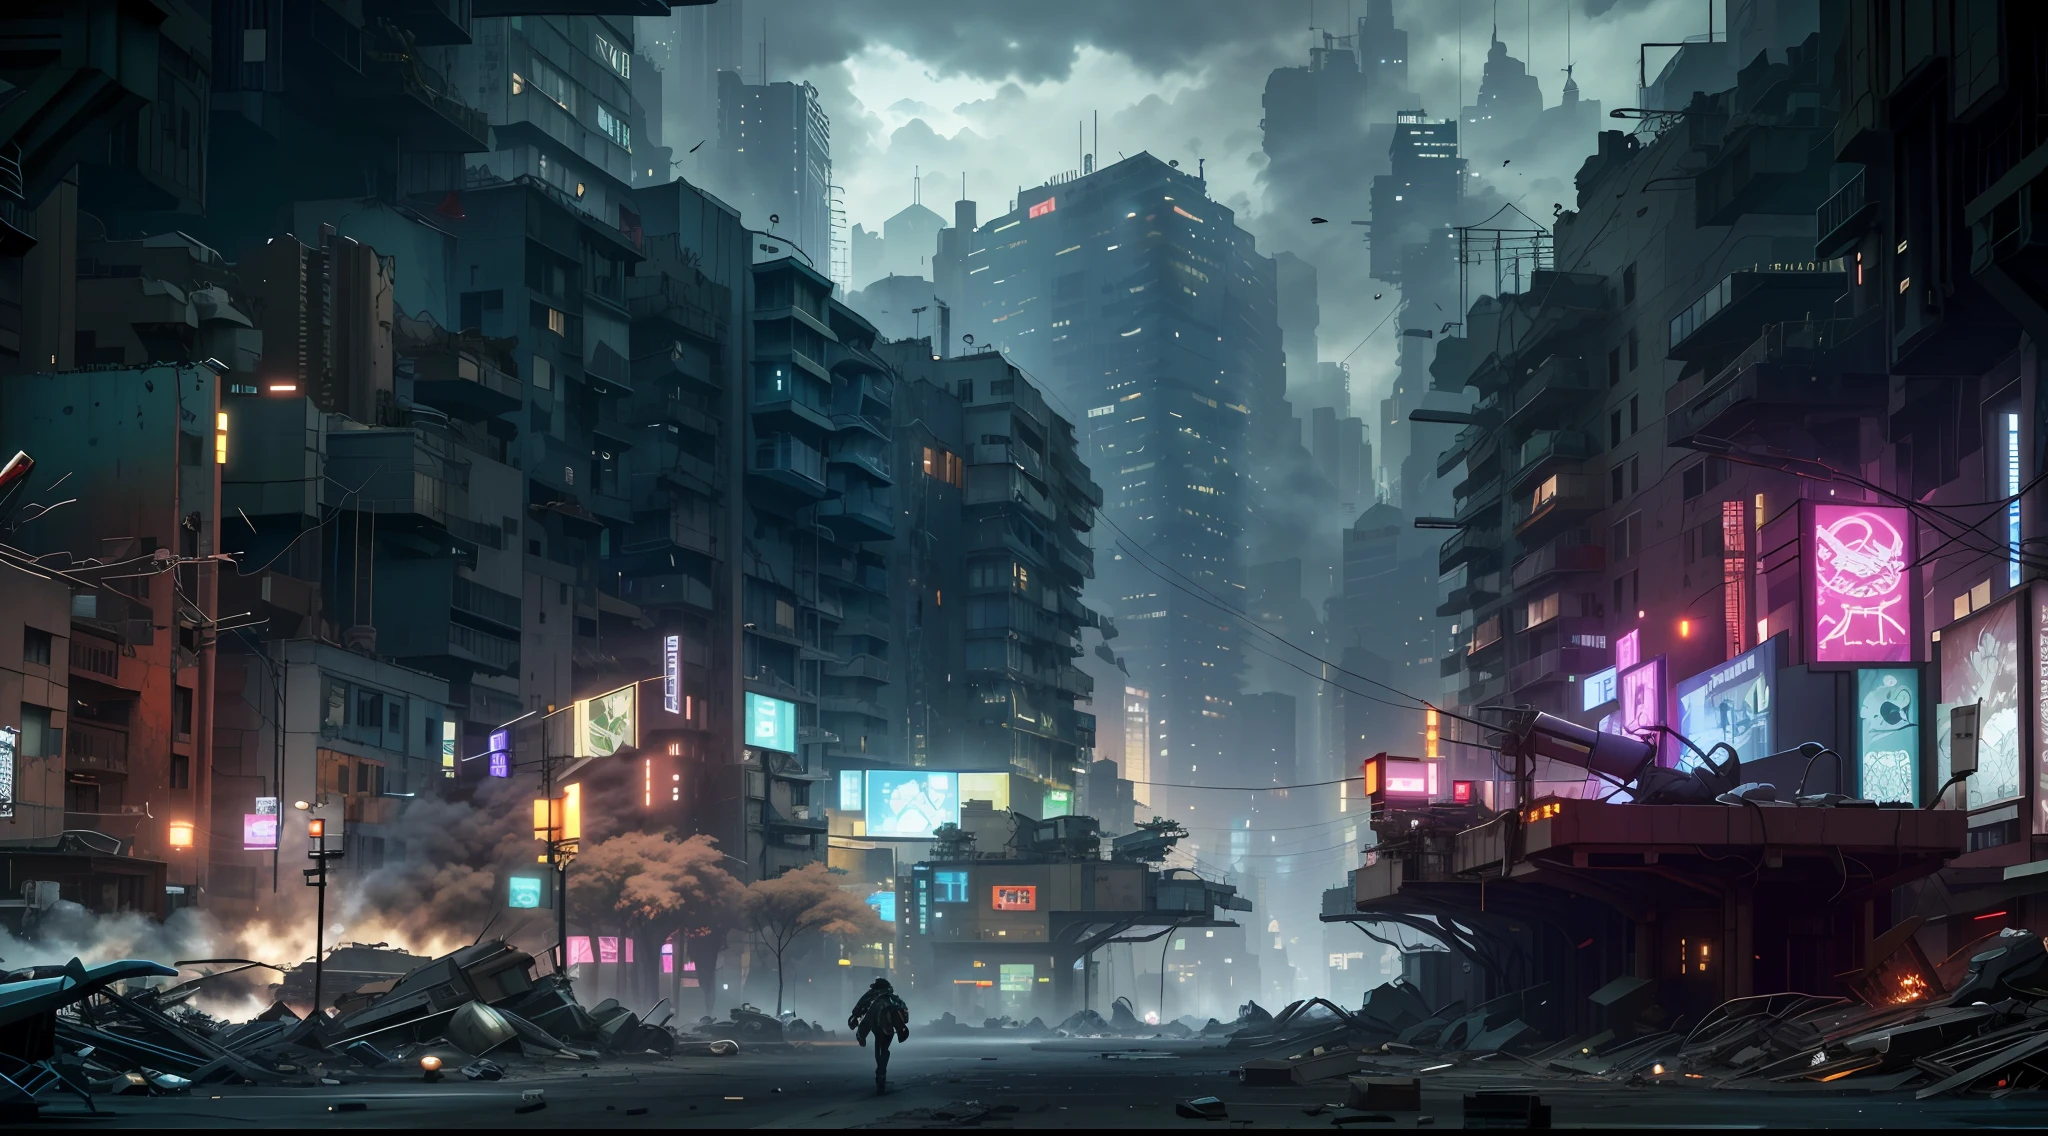 there is a picture of a city street with a lot of buildings, digital concept art of dystopian, dirty cyberpunk city, cyberpunk apocalyptic city, post - apocalyptic city streets, cyberpunk city abandoned, dystopian scifi apocalypse, dystopian cyberpunk city, dark cyberpunk metropolis, dark fantasy city, dire cyberpunk city, apocalyptic city, destroyed city, cyberpunk dark fantasy art, dark futuristic city, cyberpunk street, 1 man last standing, best proportion